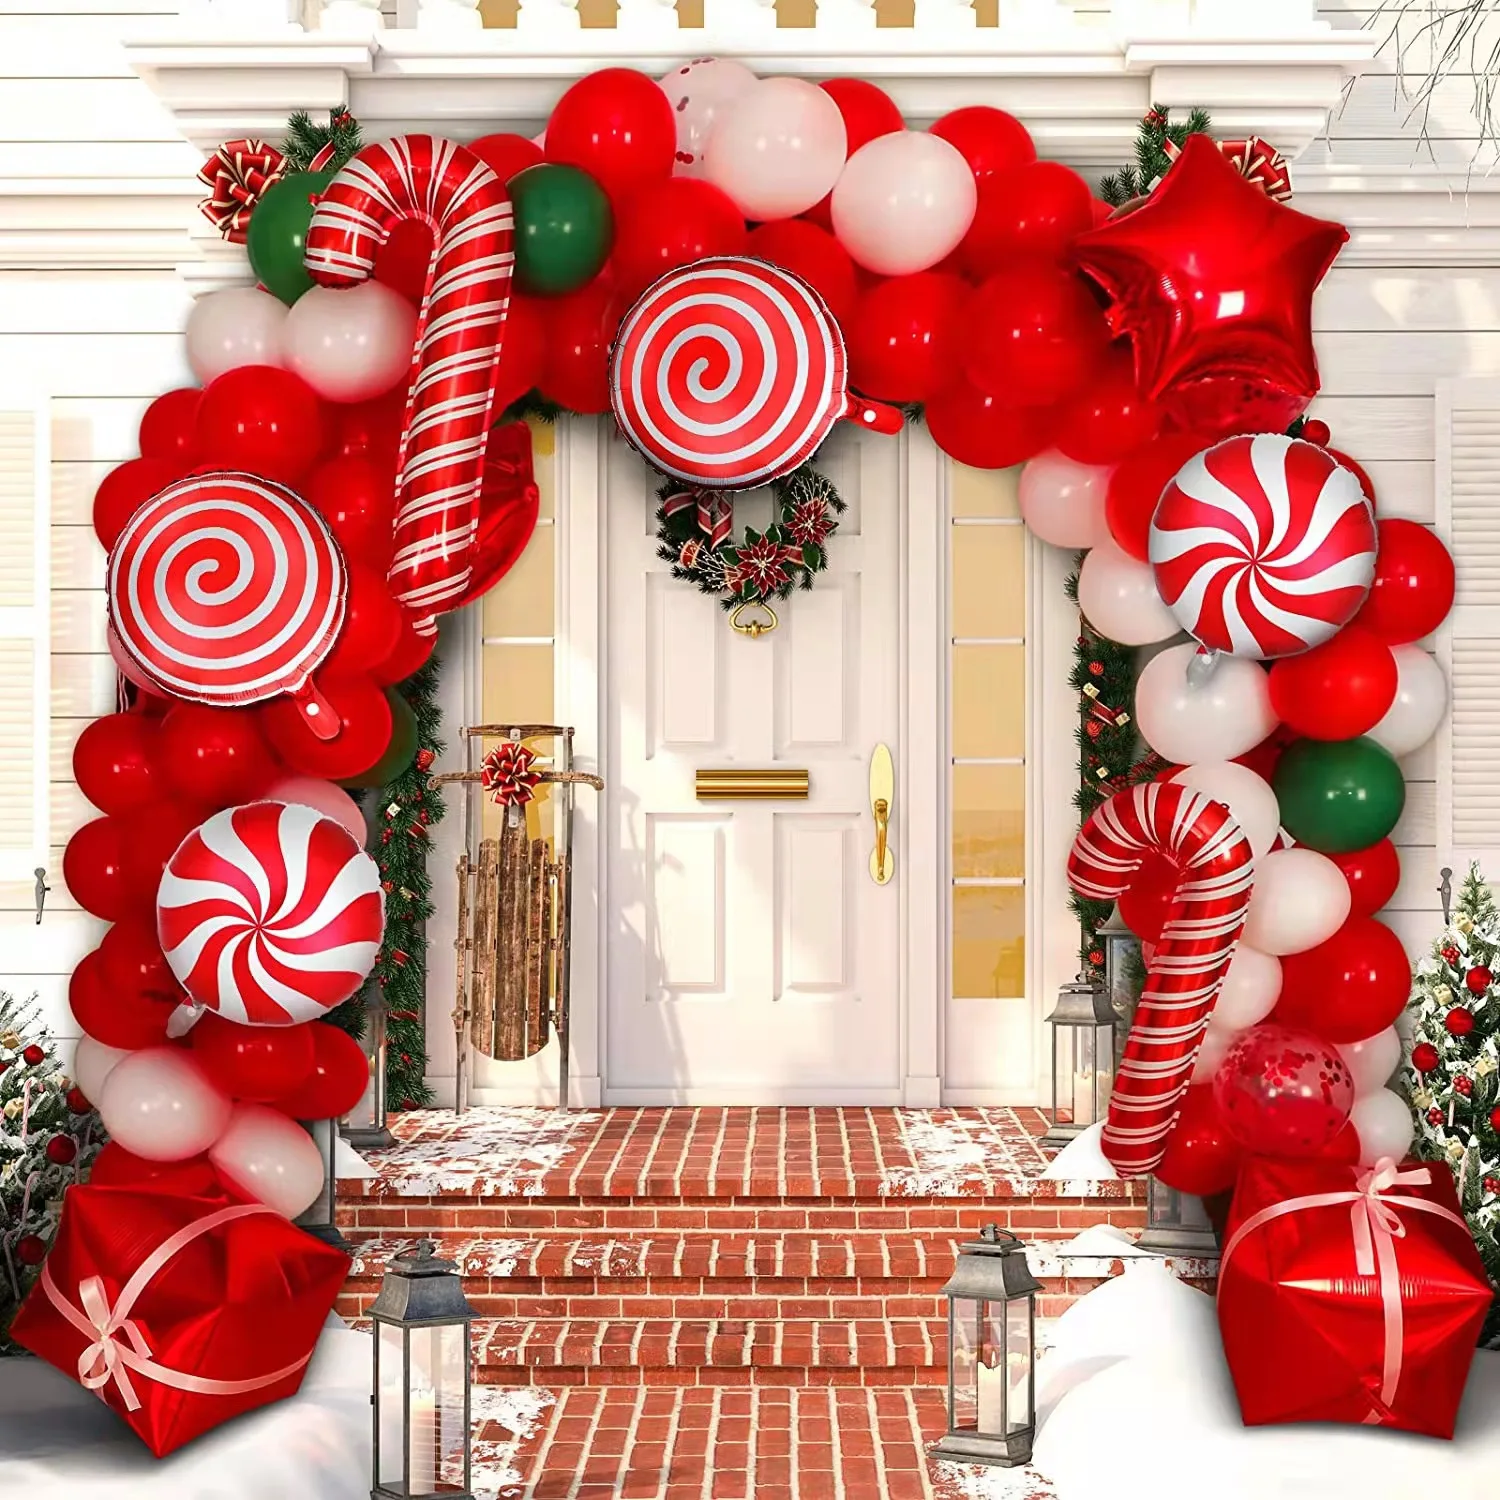 

200 pcs Merry Christmas Balloons Garland Arch Kit Sweet Candy Cane Present Box Confetti Latex Ballon Party Decorations